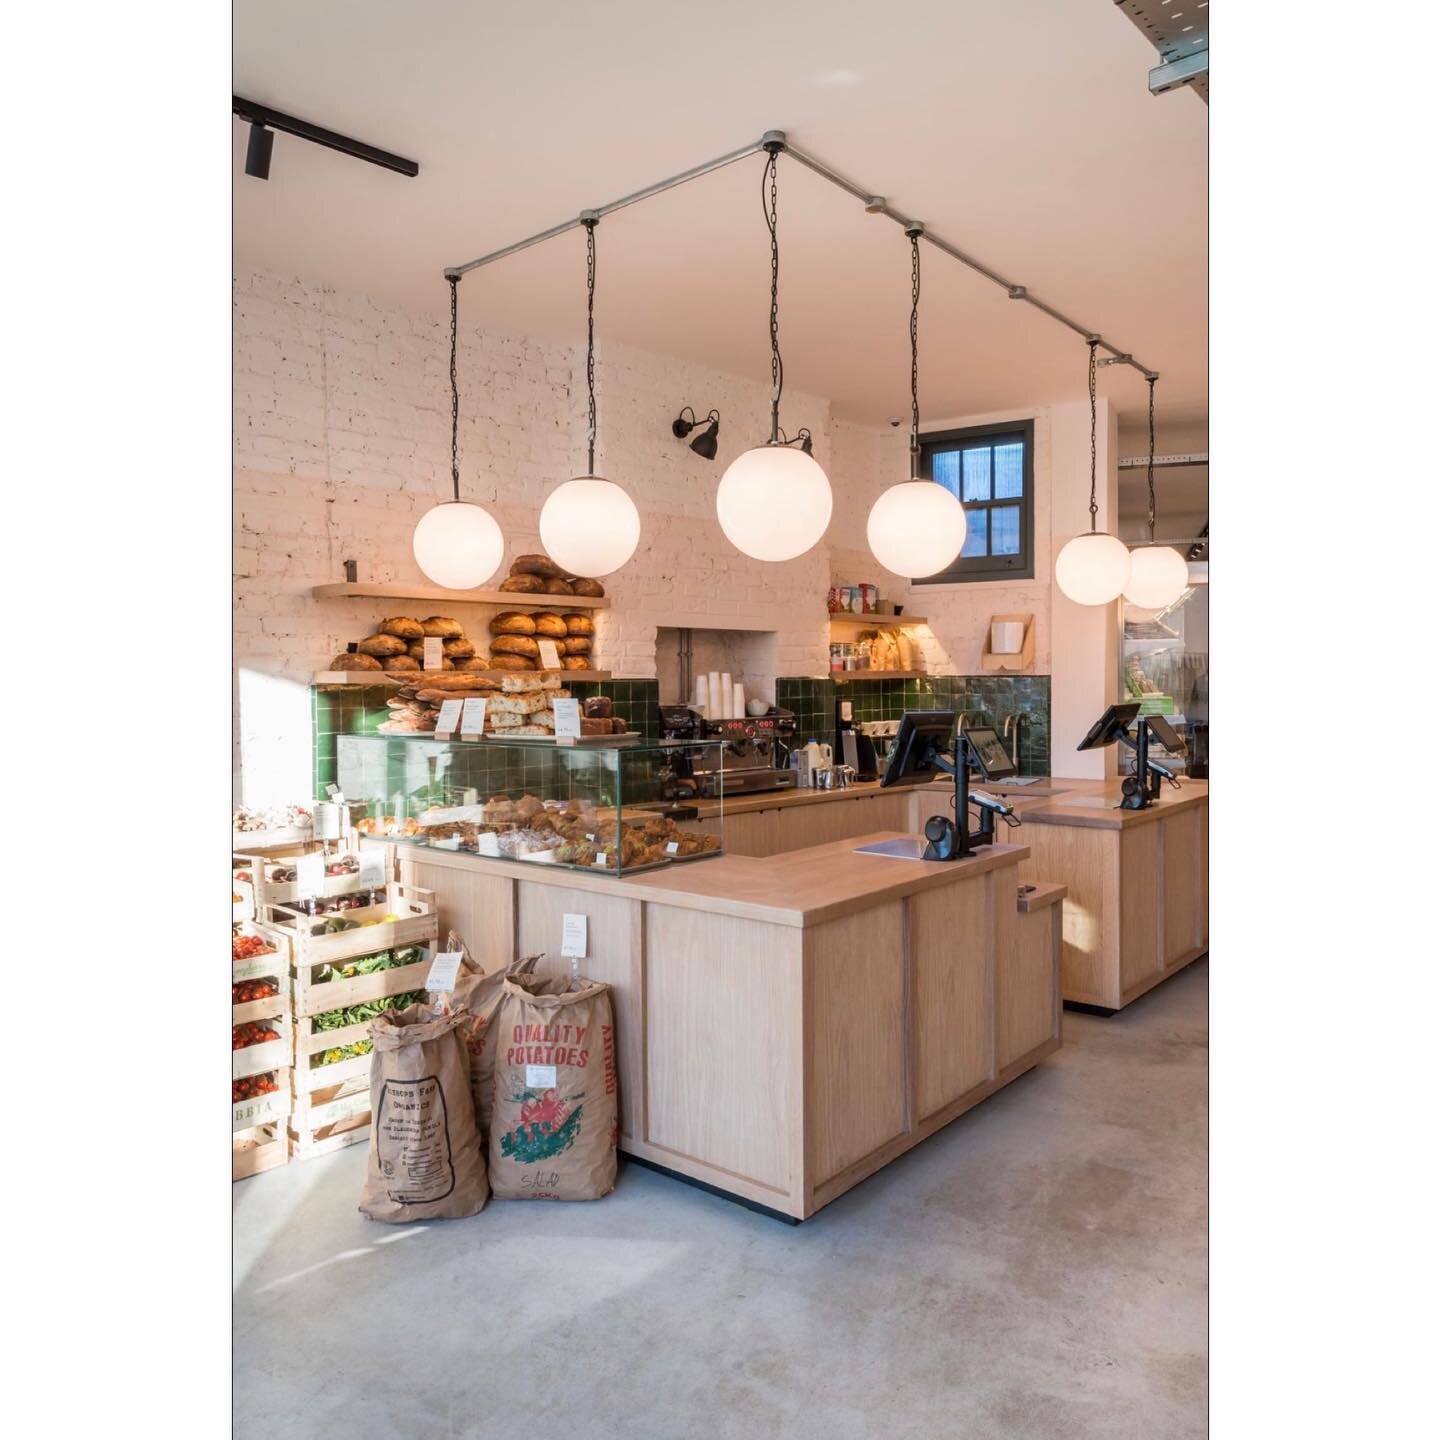 This time last year we were lucky enough to help @trudesgrocery design their fabulous new grocery store in Clapham. They are now up and running selling the most delicious produce. If you&rsquo;re lucky enough to live nearby I&rsquo;m very jealous! 
?